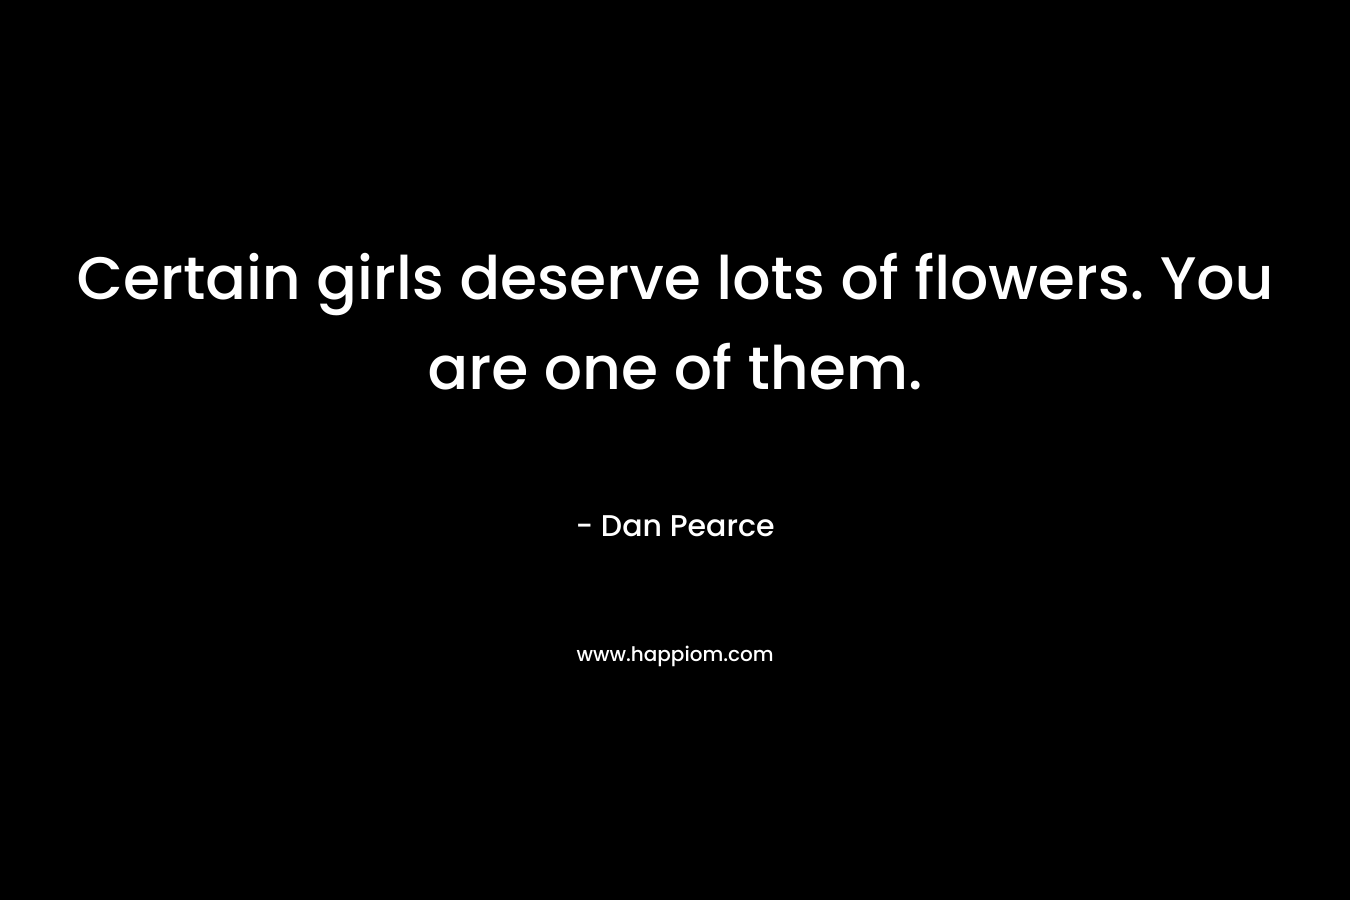 Certain girls deserve lots of flowers. You are one of them. – Dan Pearce